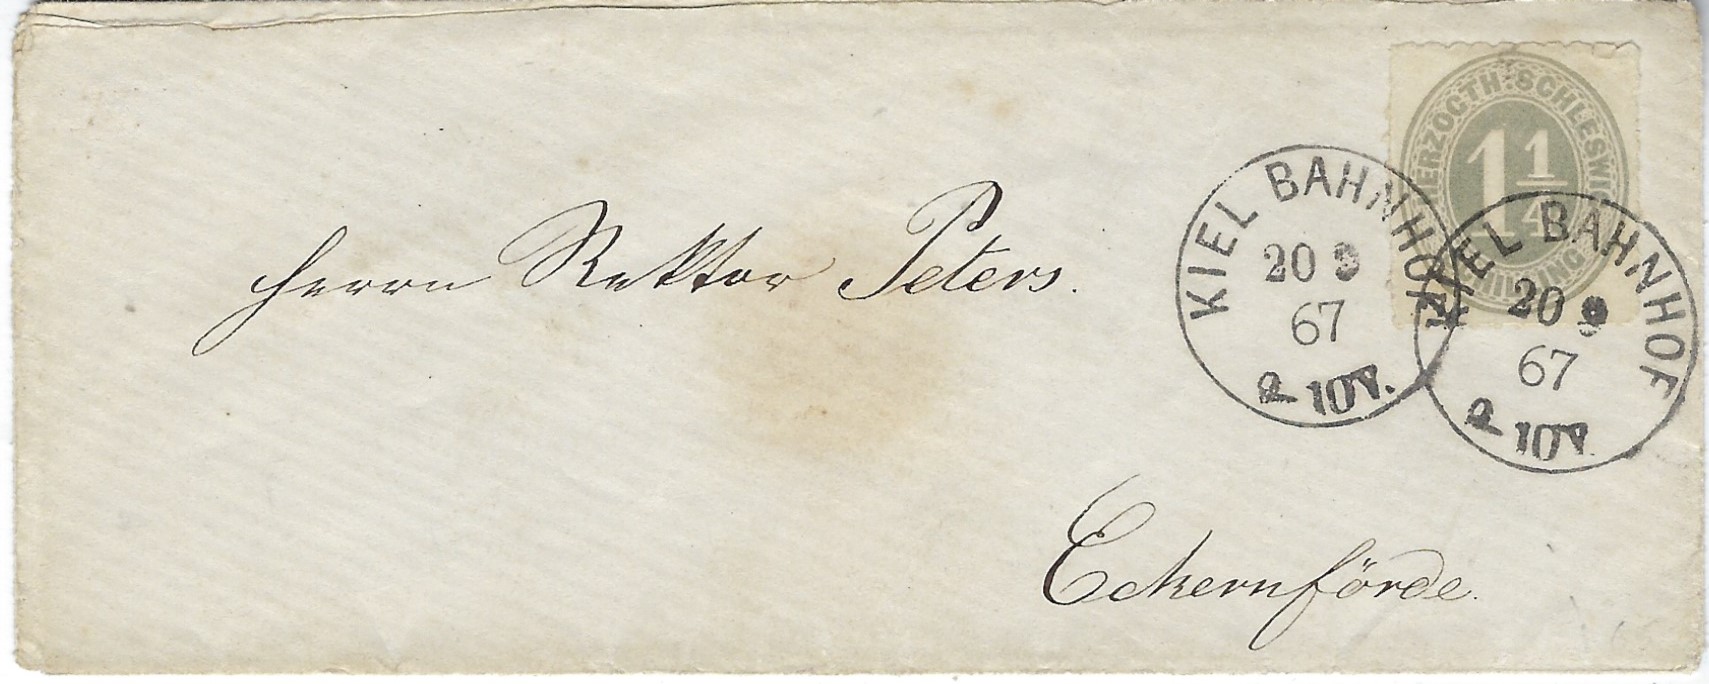 Germany (Schleswig-Holstein) 1867 (20 9) cover to  Eckernforde bearing single franking 1867 1 ¼ S grey tied by two very fine strikes of Kiel Bahnhof cds, arrival backstamp of same date